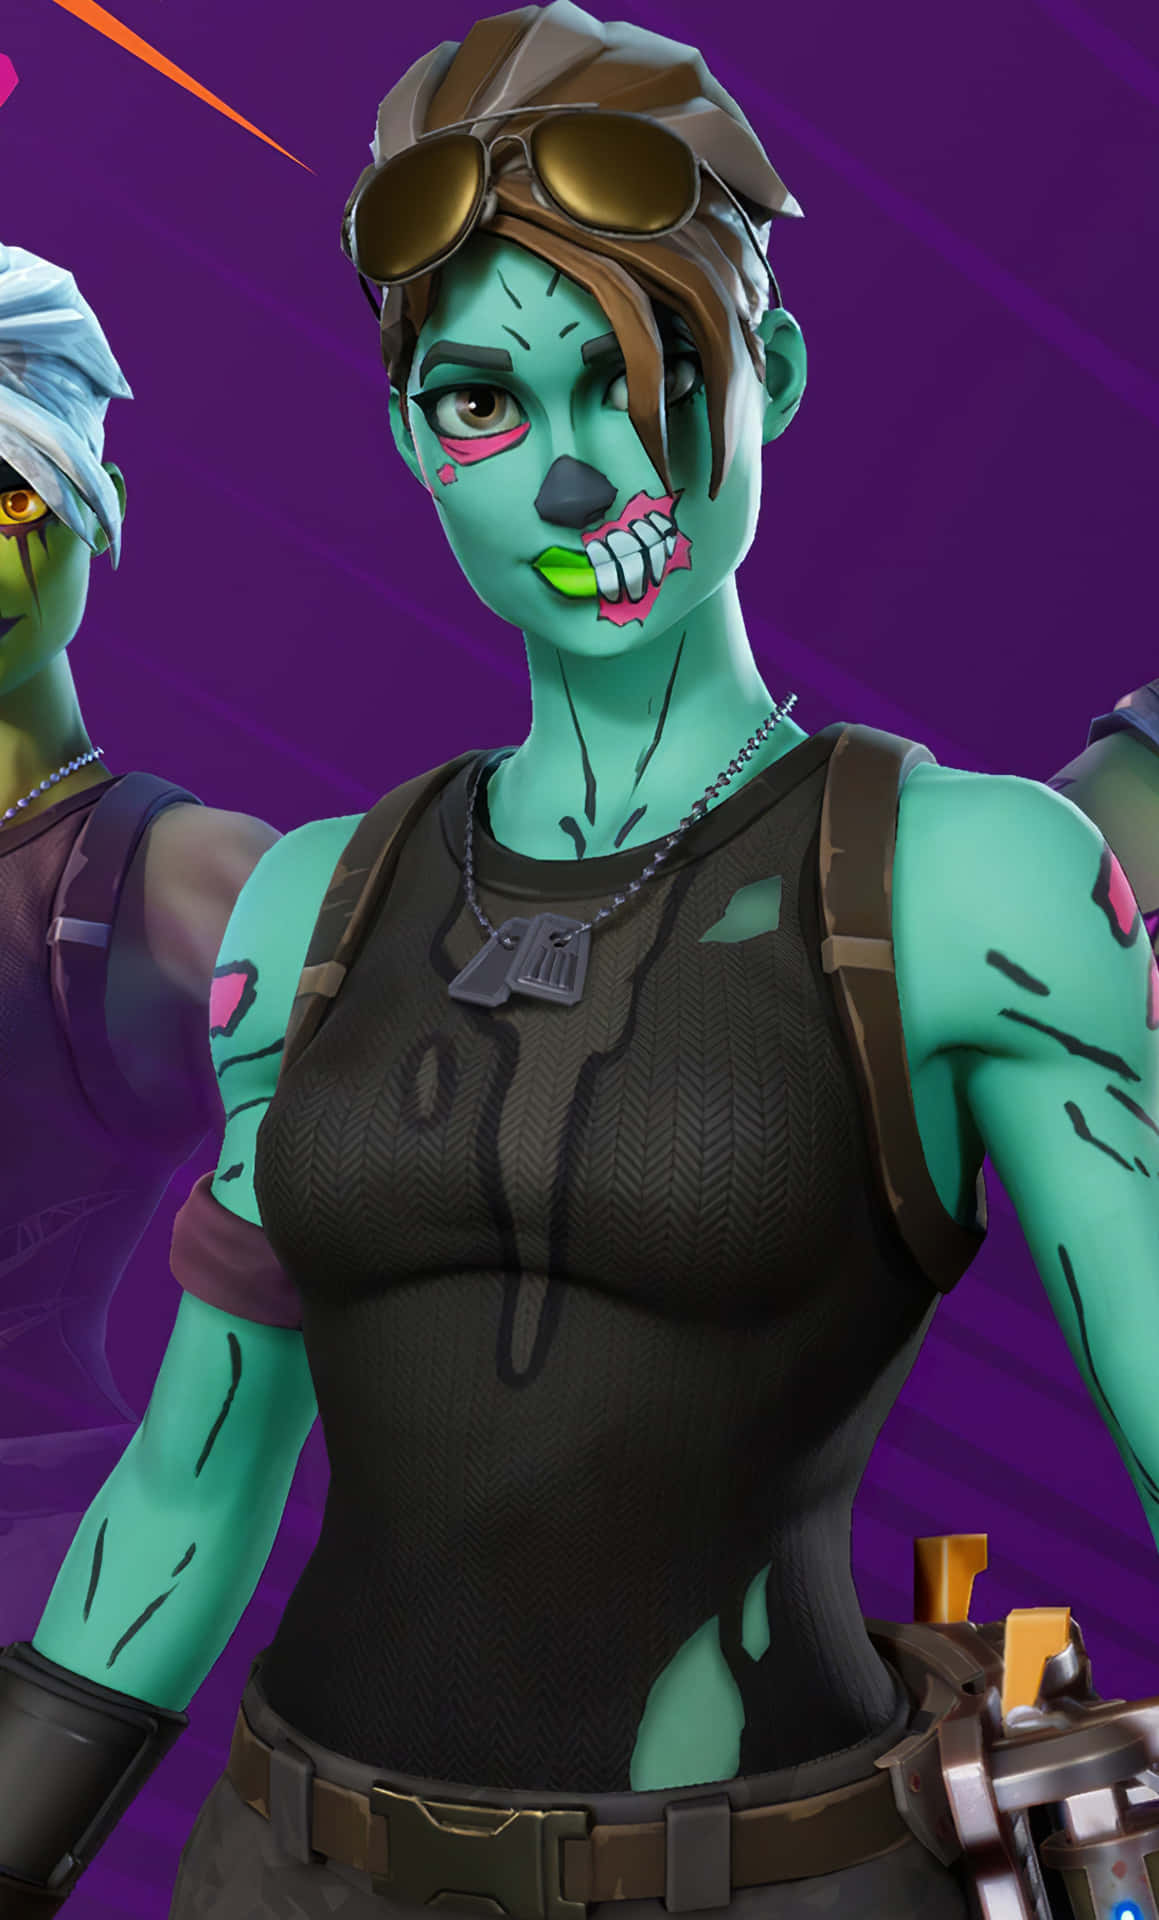 This Cool Ghoul Trooper is ready for battle! Wallpaper